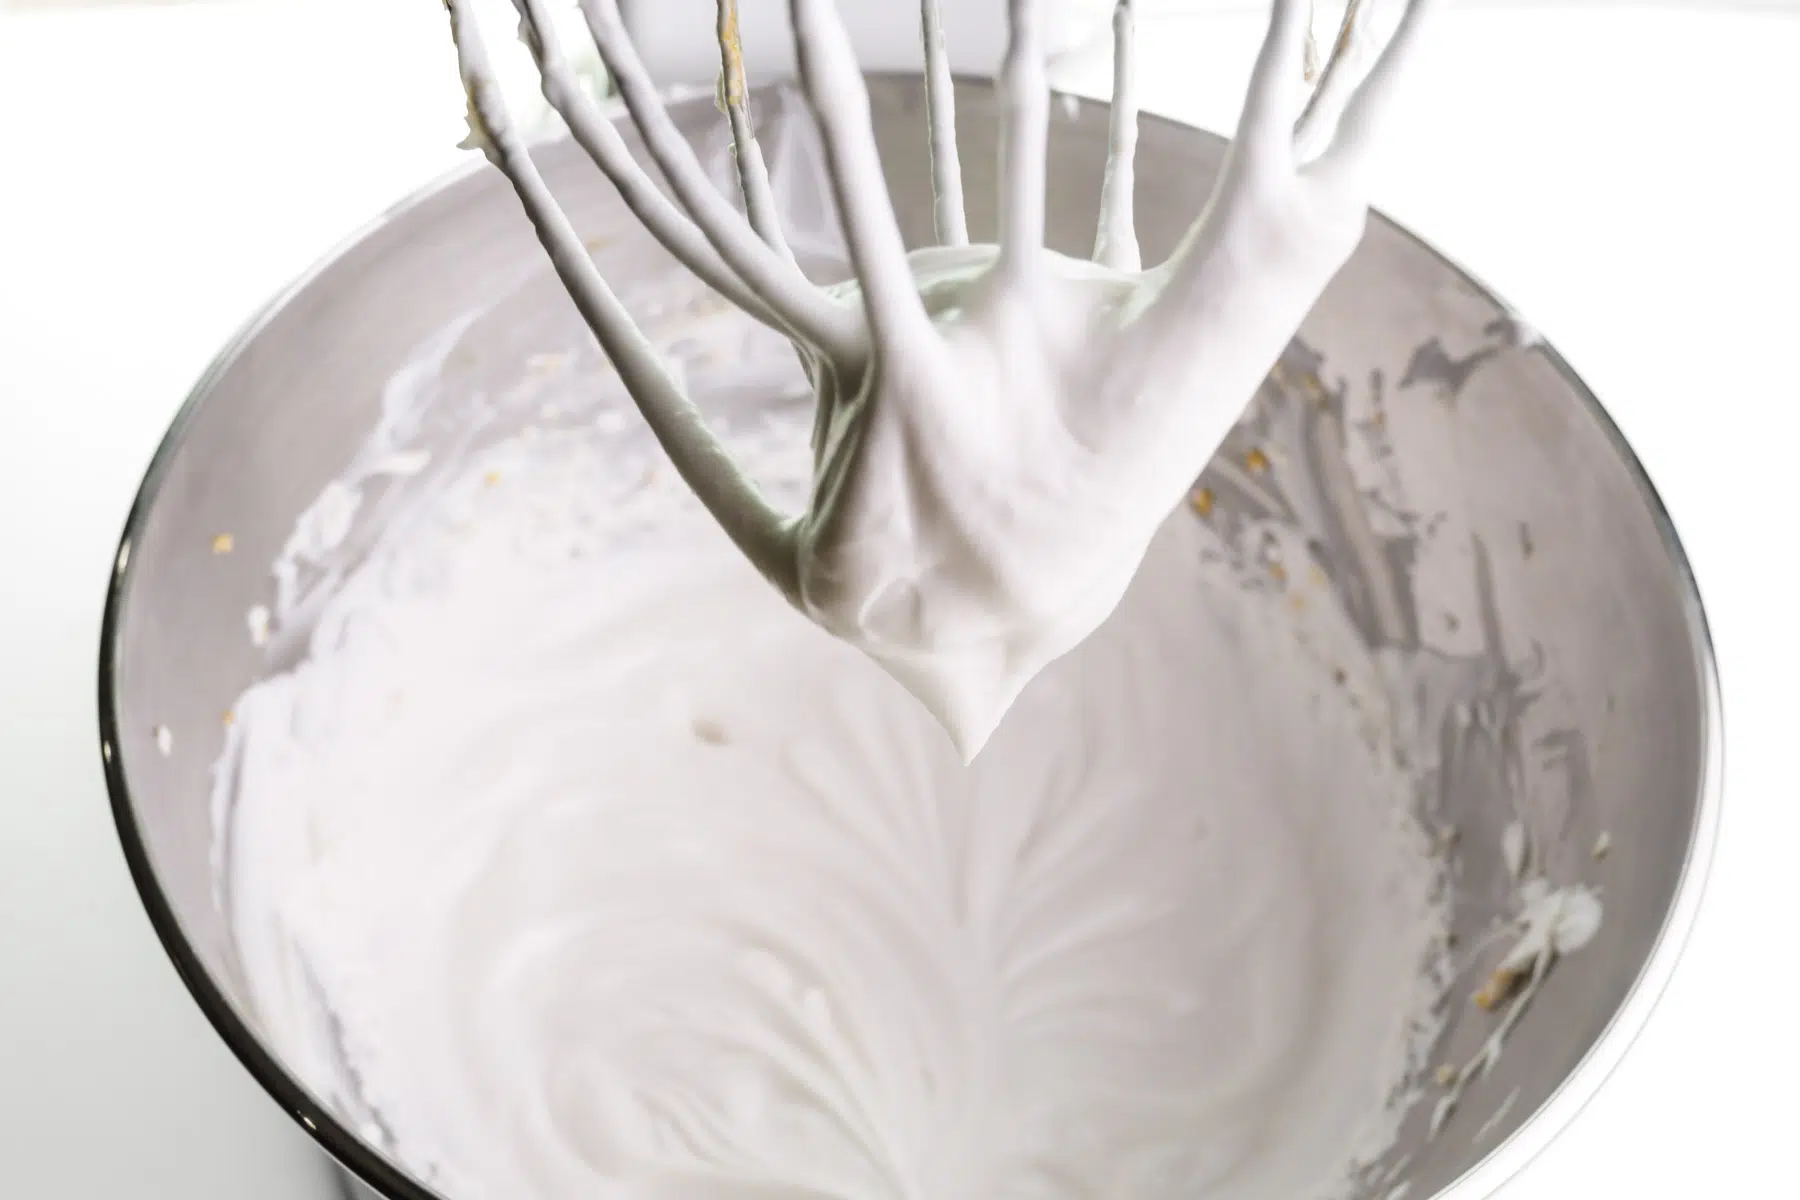 Coconut milk has been whipped using a stand mixer. The beats and the bowl are shown.